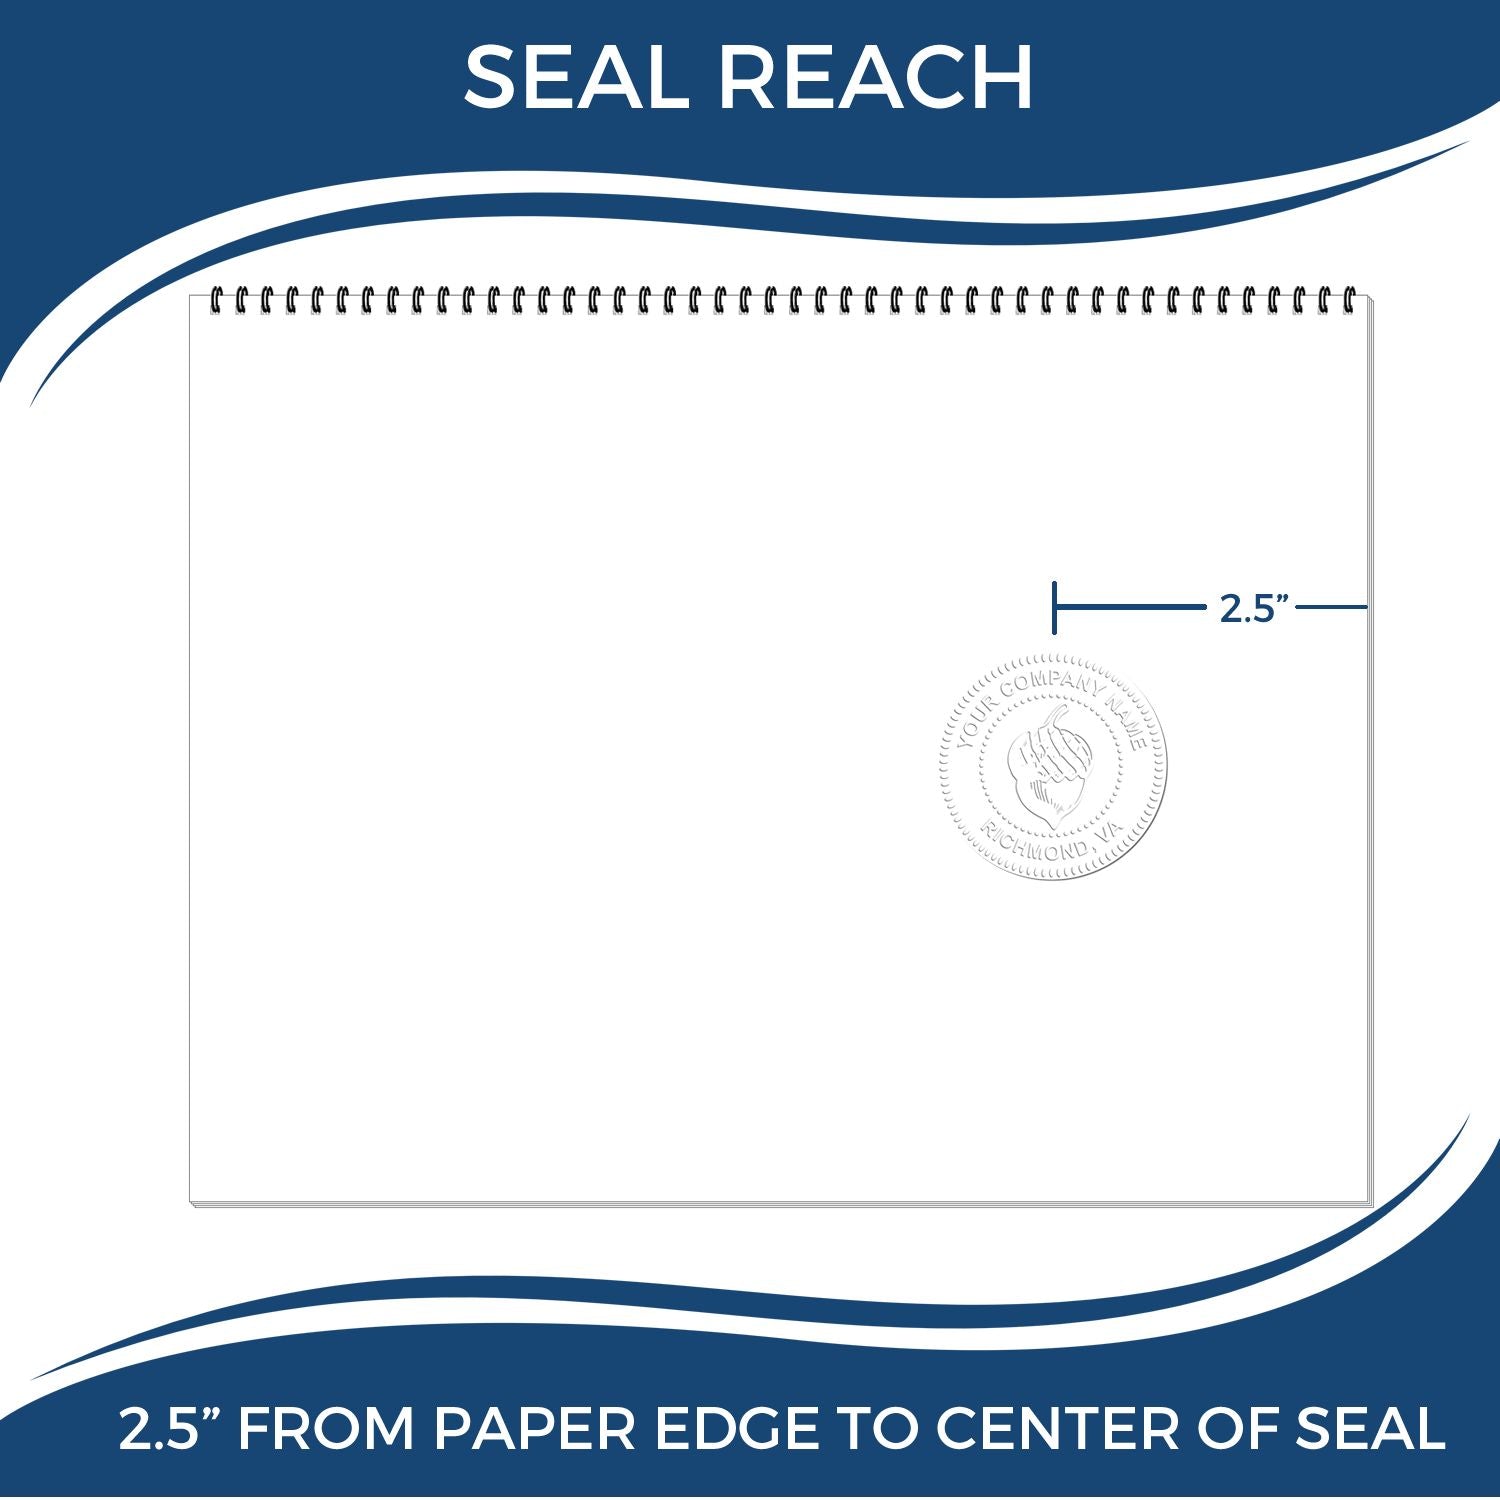 An infographic showing the seal reach which is represented by a ruler and a miniature seal image of the Heavy Duty Cast Iron Louisiana Geologist Seal Embosser